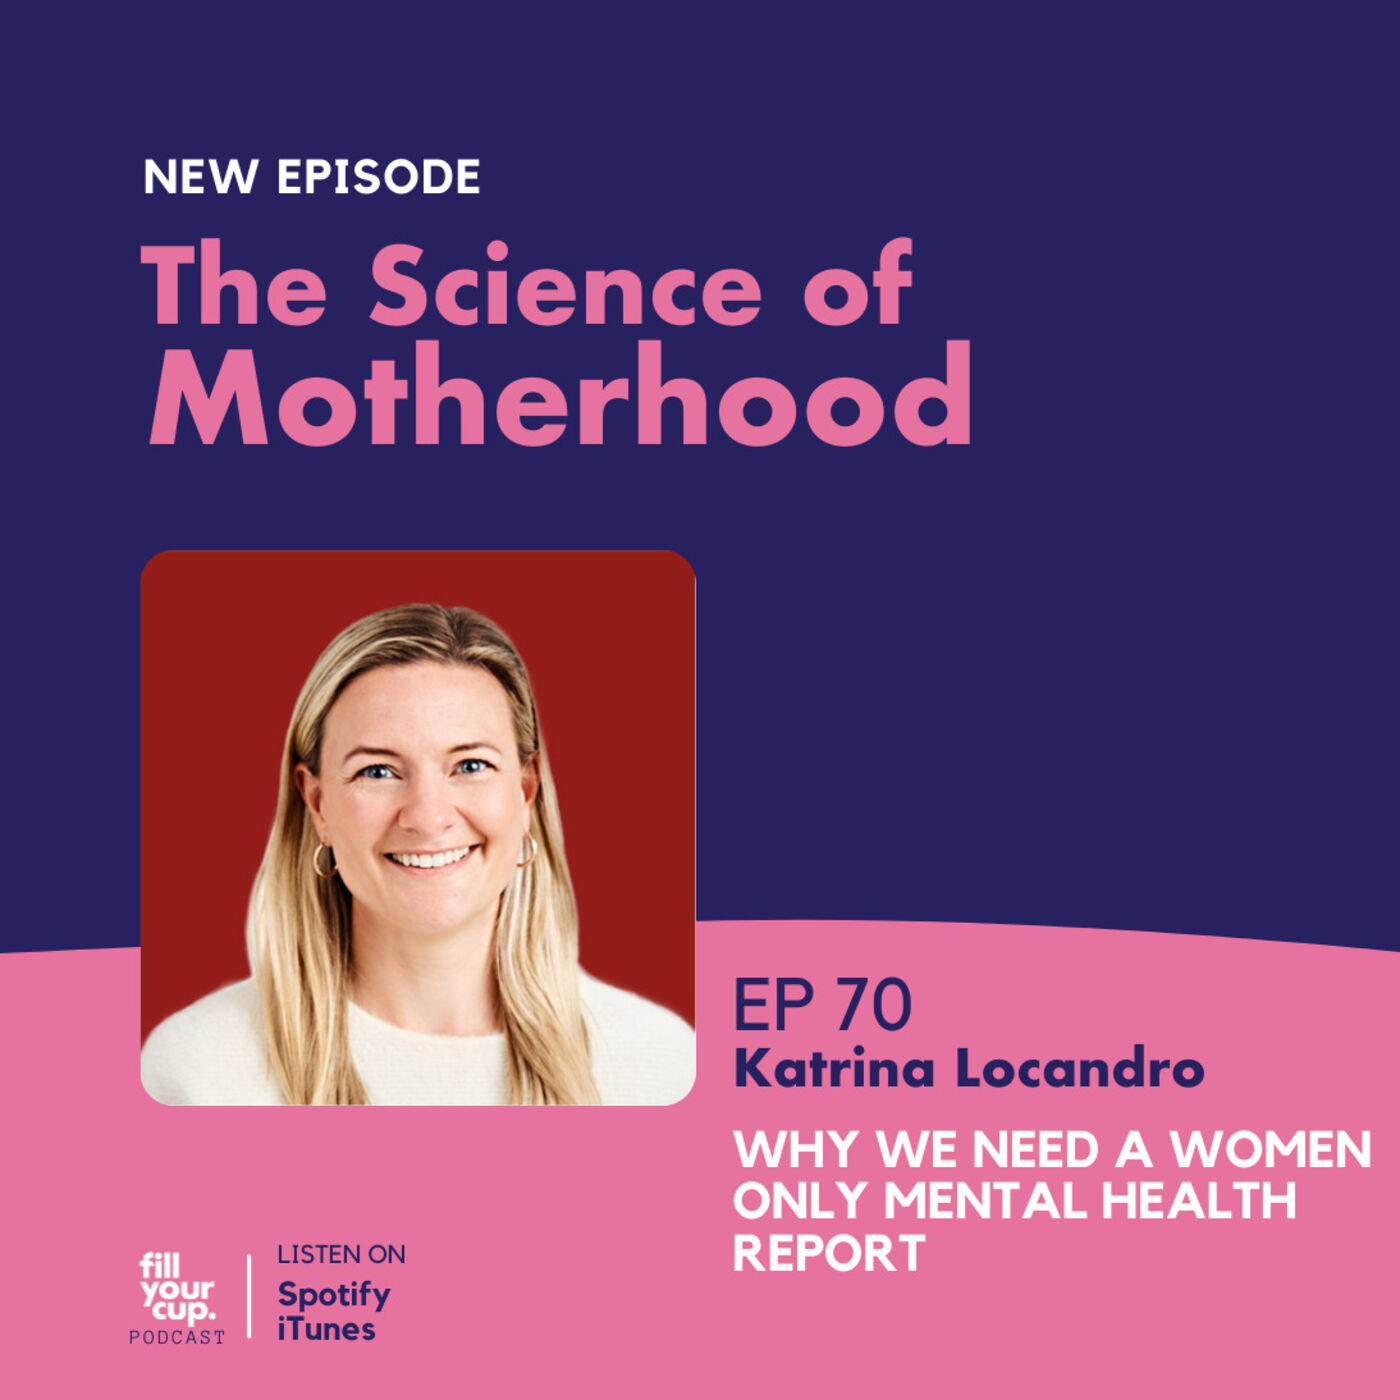 Ep 70. Katrina Locandro (Liptember Foundation) - Why We Need a Women Only Mental Health Report